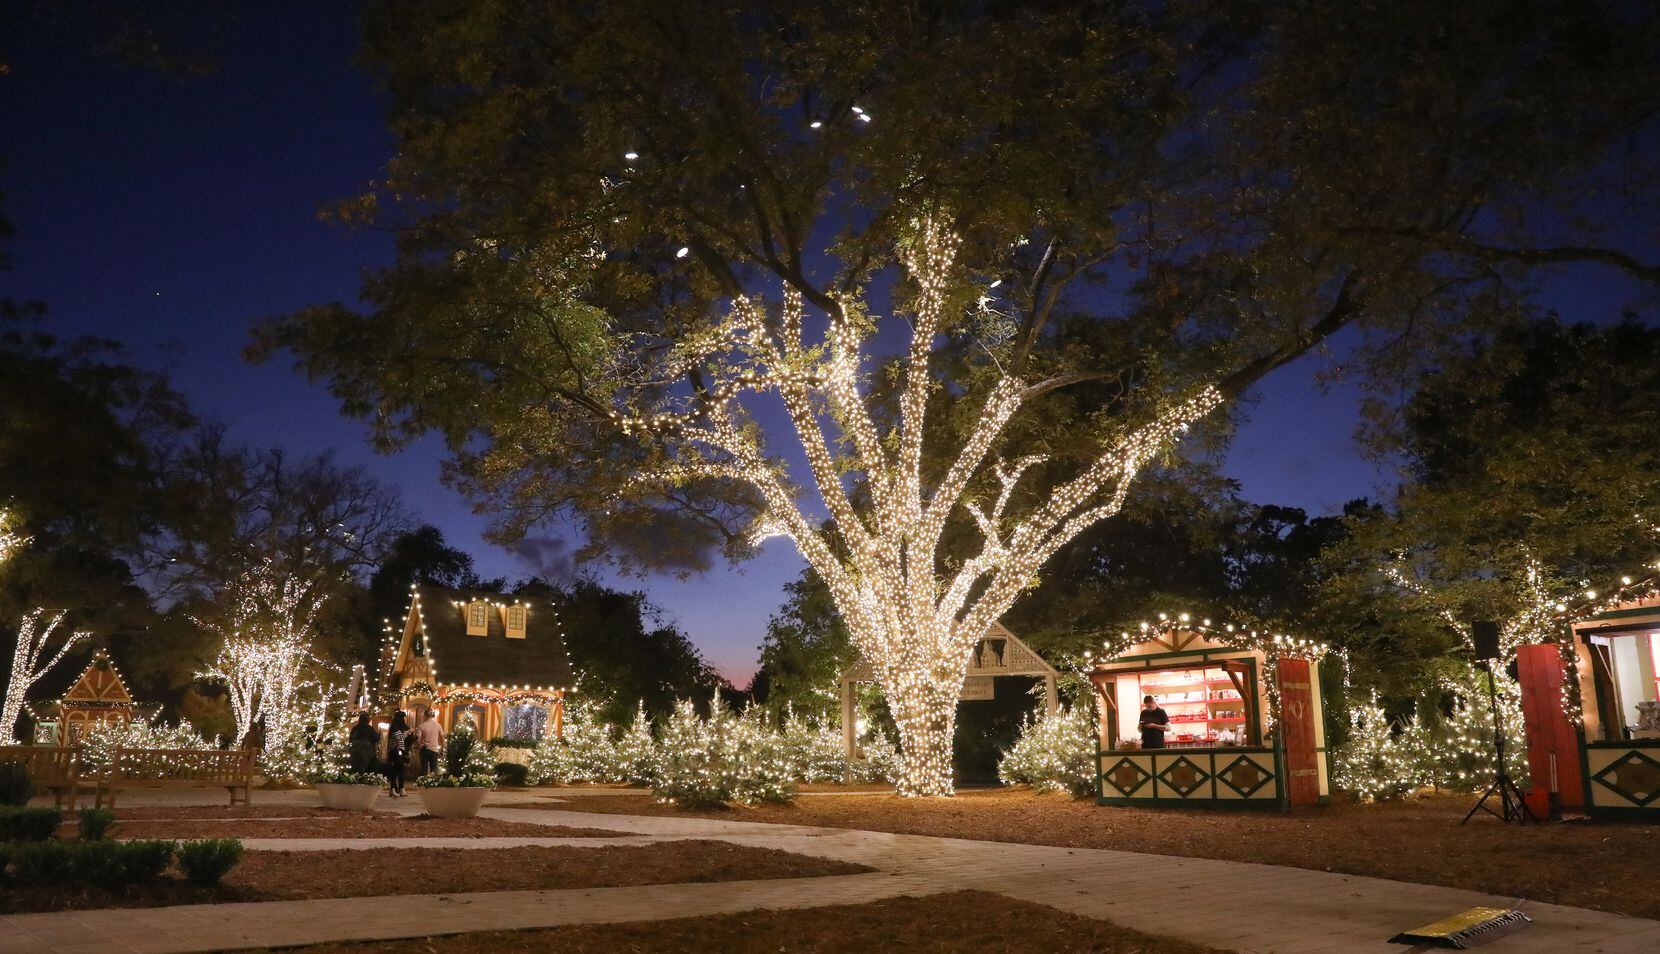 Visit the Dallas Arboretum day or night to walk through the “12 Days of Christmas” holiday...